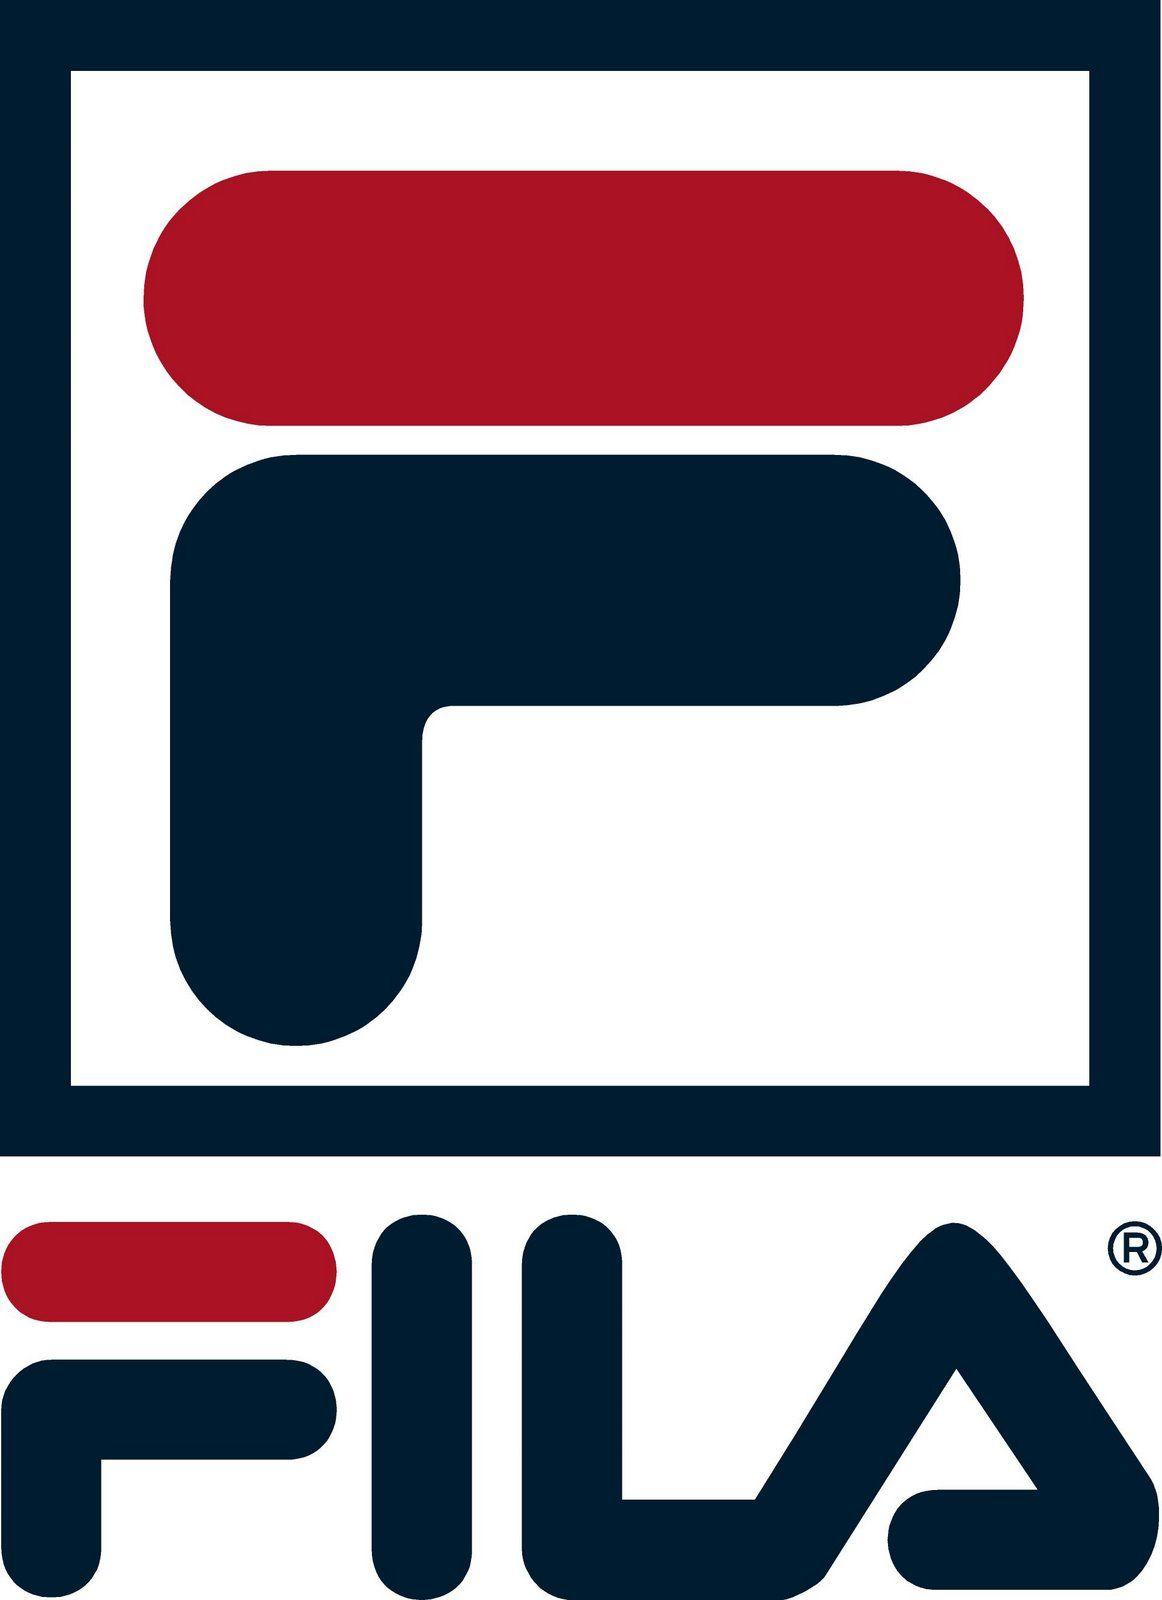 Fila is one of the world's largest sportswear manufacturing